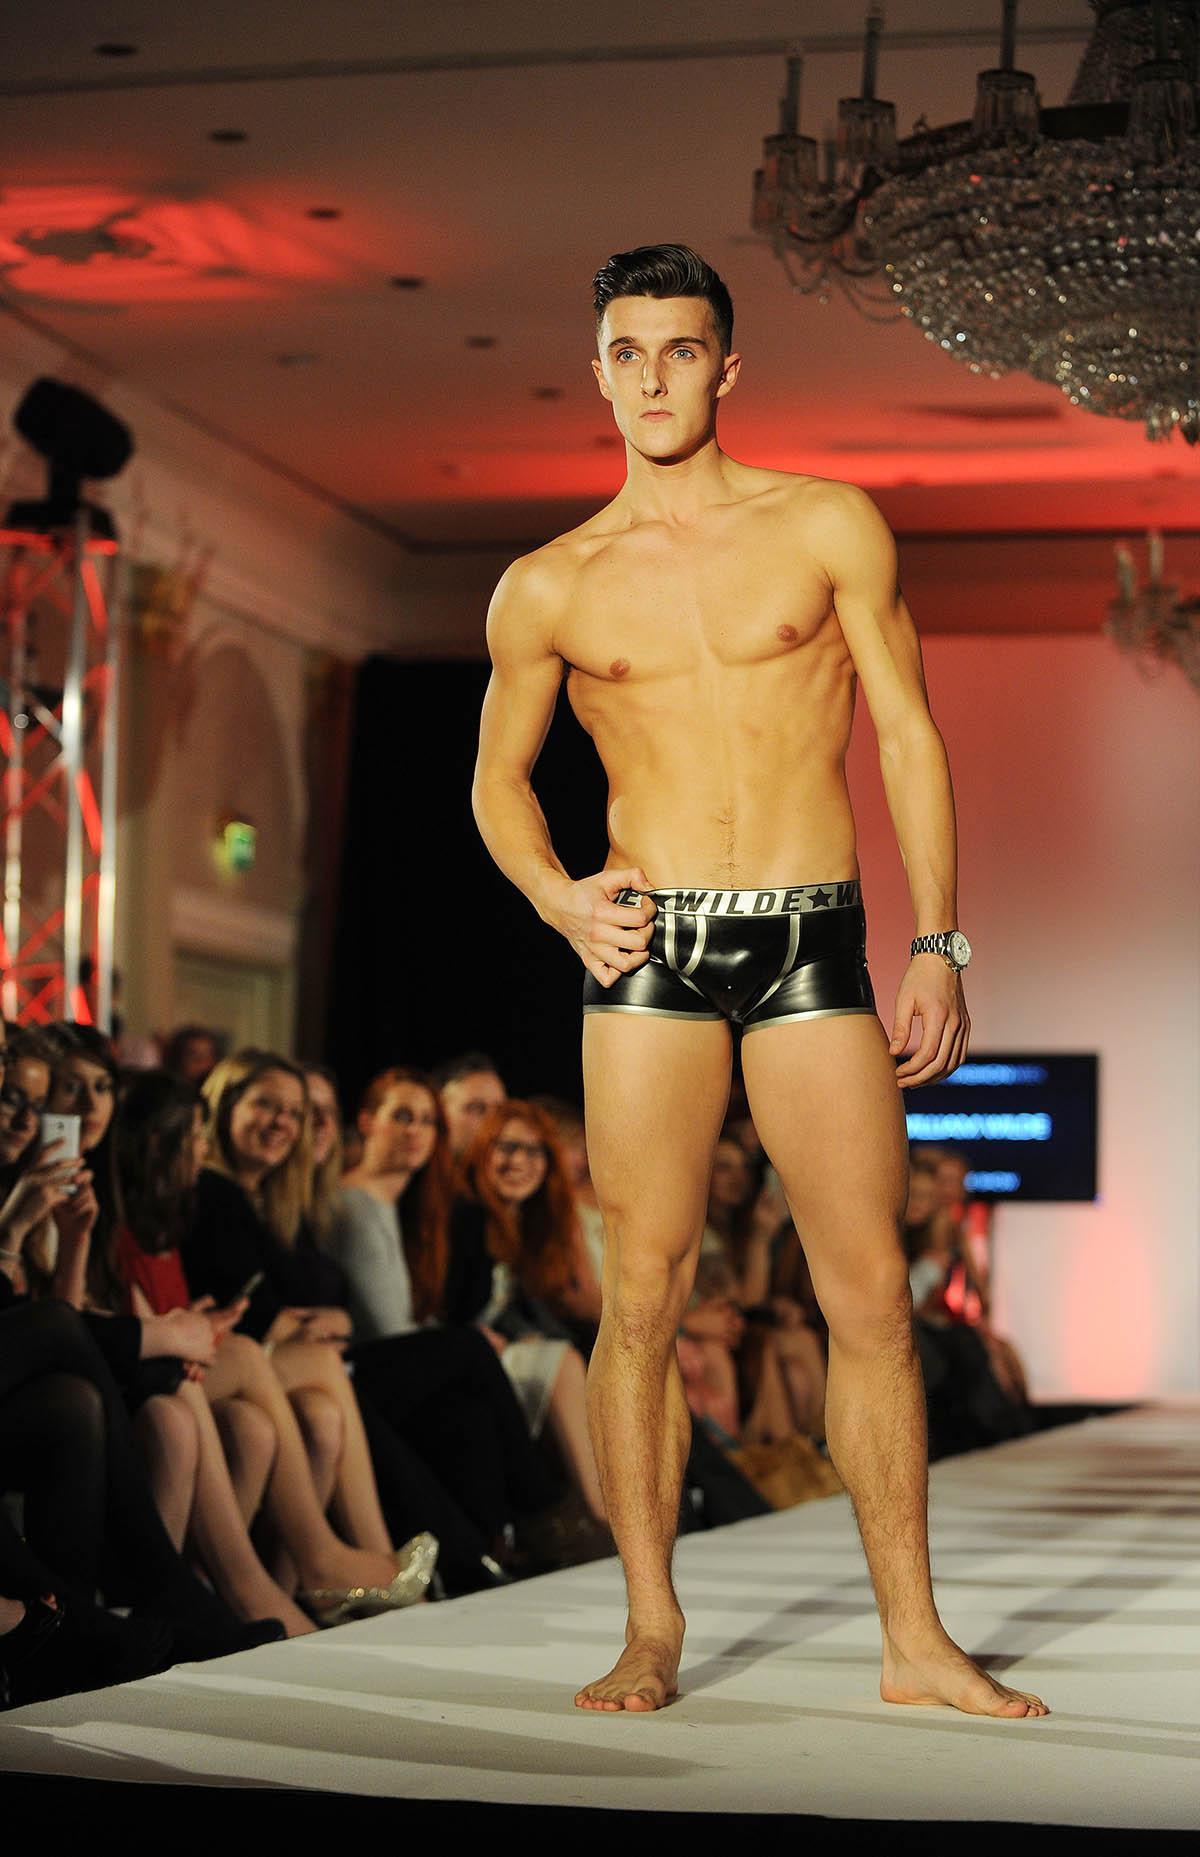 Pictures from Oxford Fashion Week's Lingerie Show in the Randolph Hotel Ballroom